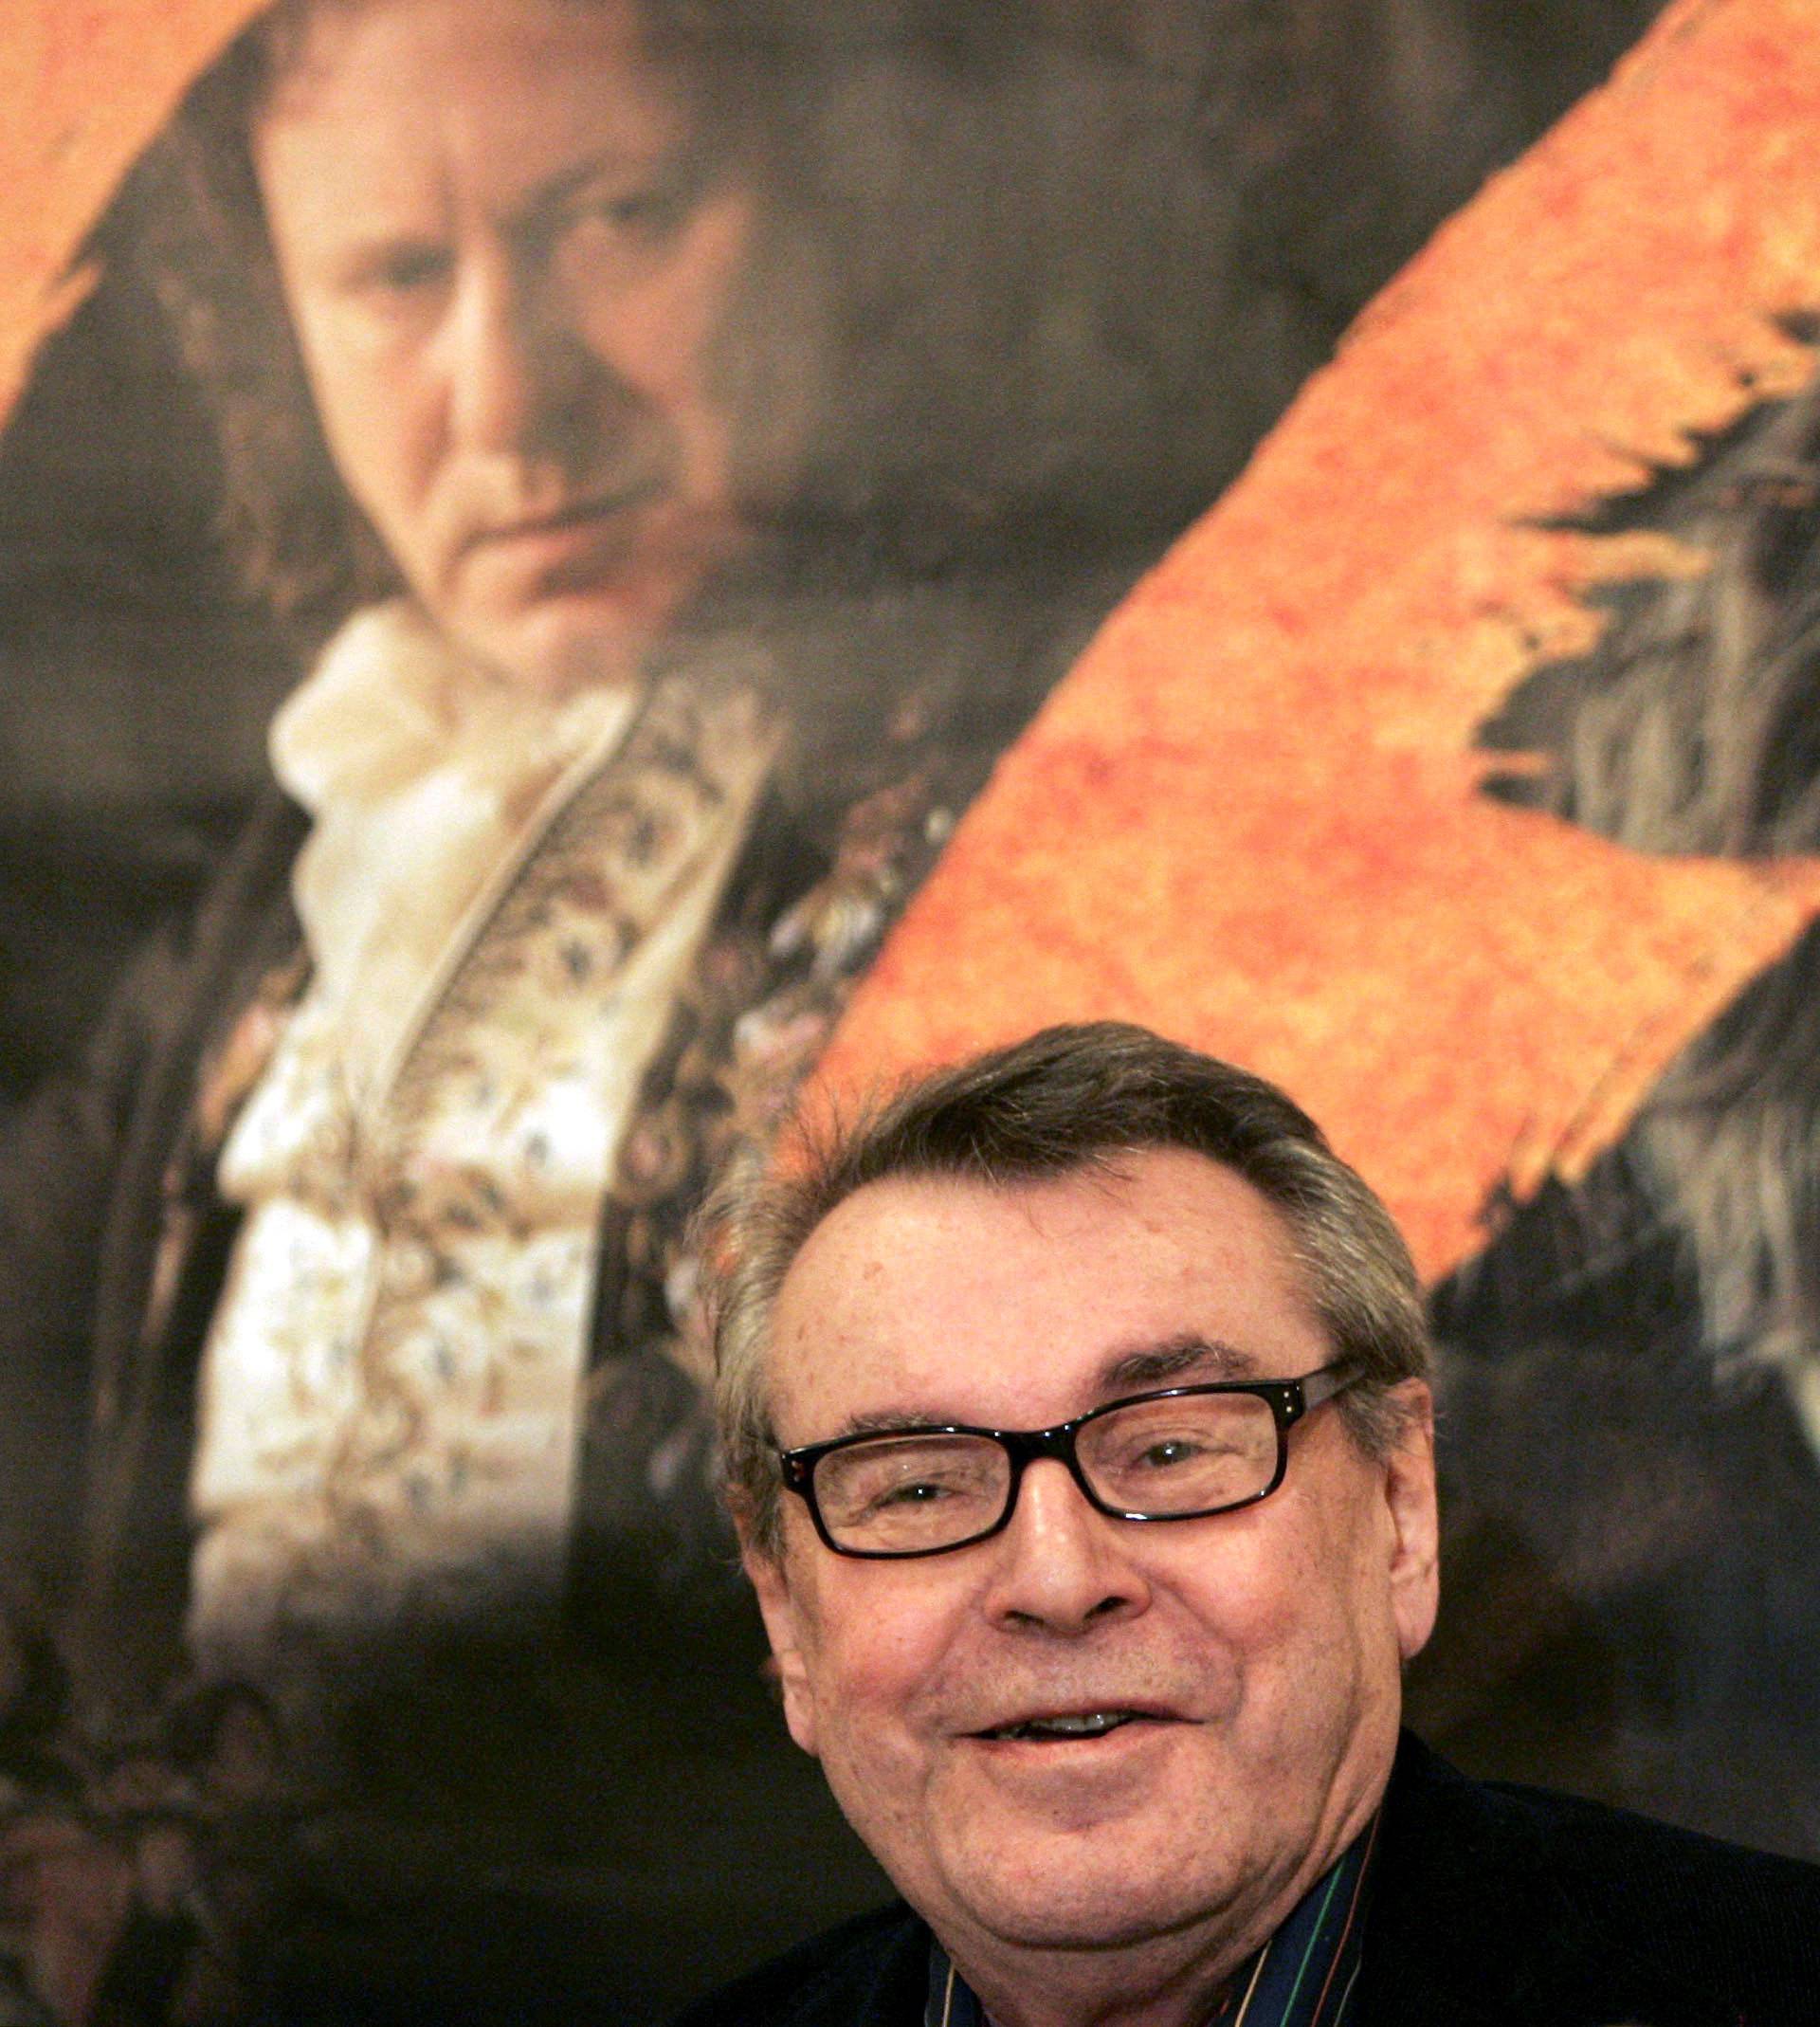 FILE PHOTO: Czech director Milos Forman smiles during a news conference in Prague